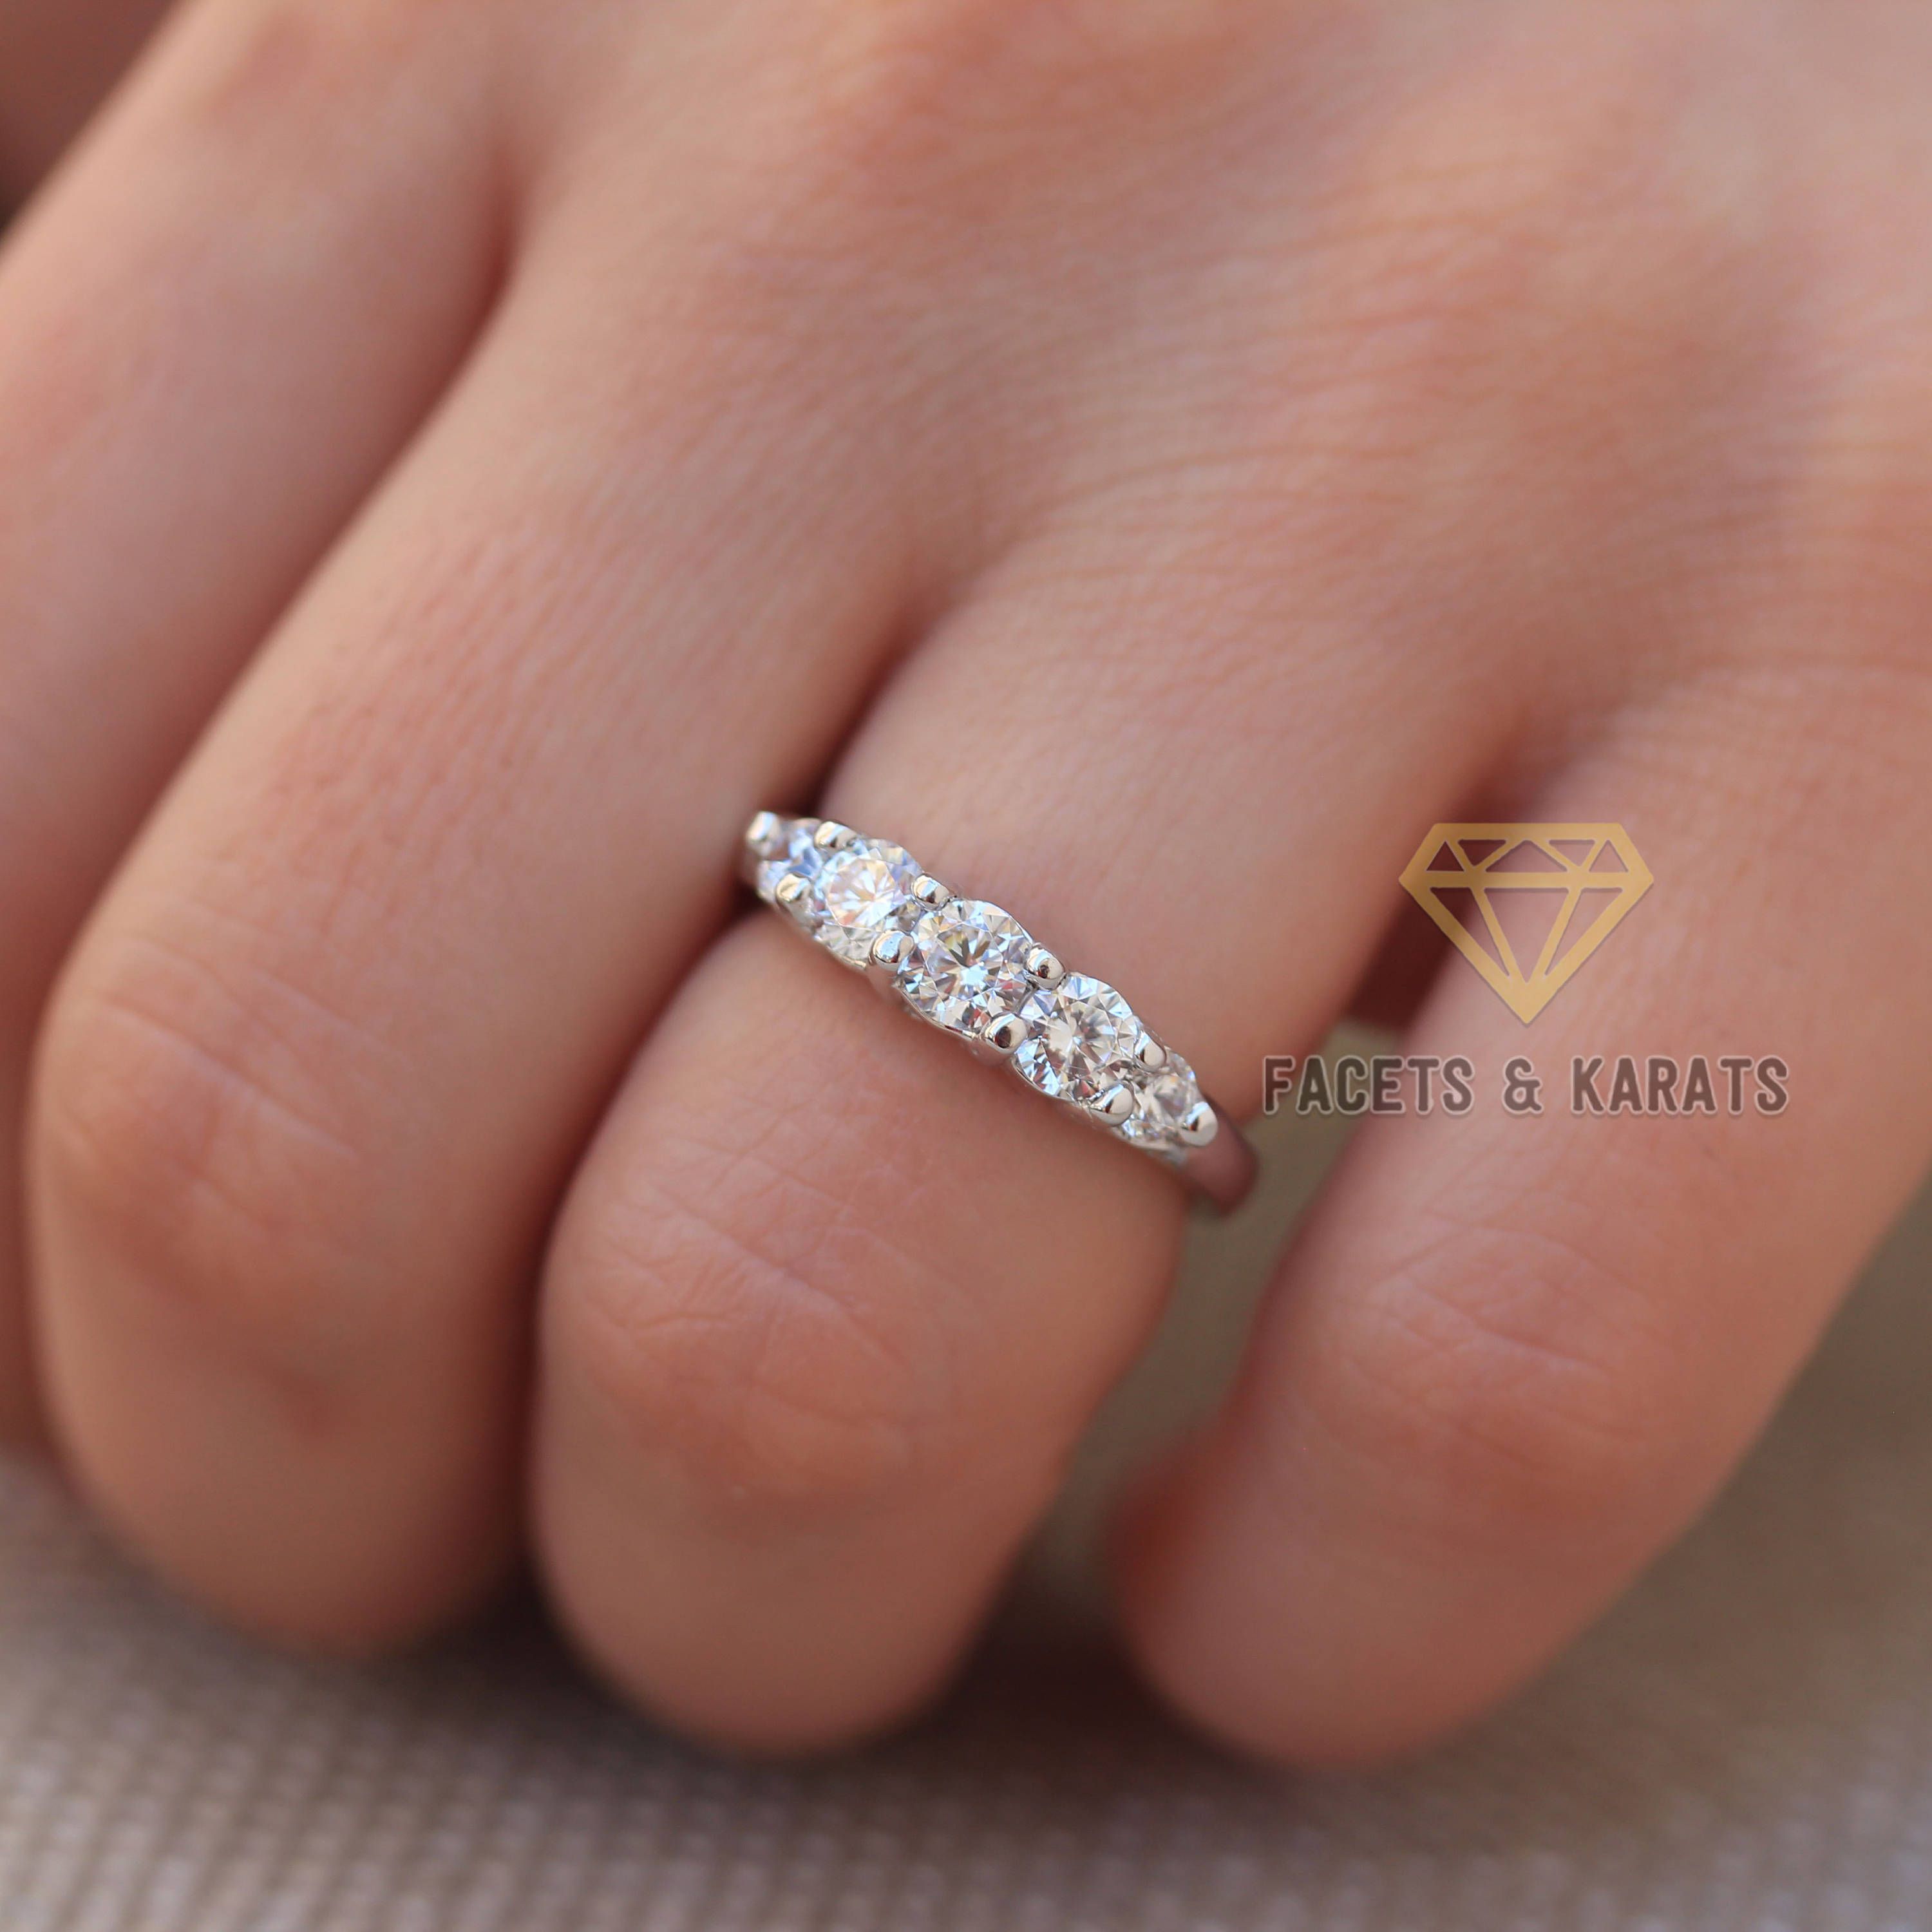 5 Stone Diamond Ring 1 Carat 14k Solid White Gold Five Stone Wedding Band  Anniversary Ring Man Made Diamond Simulant Wedding Ring Band Within 2019 Diamond Frame Five Stone Anniversary Bands In White Gold (View 1 of 25)